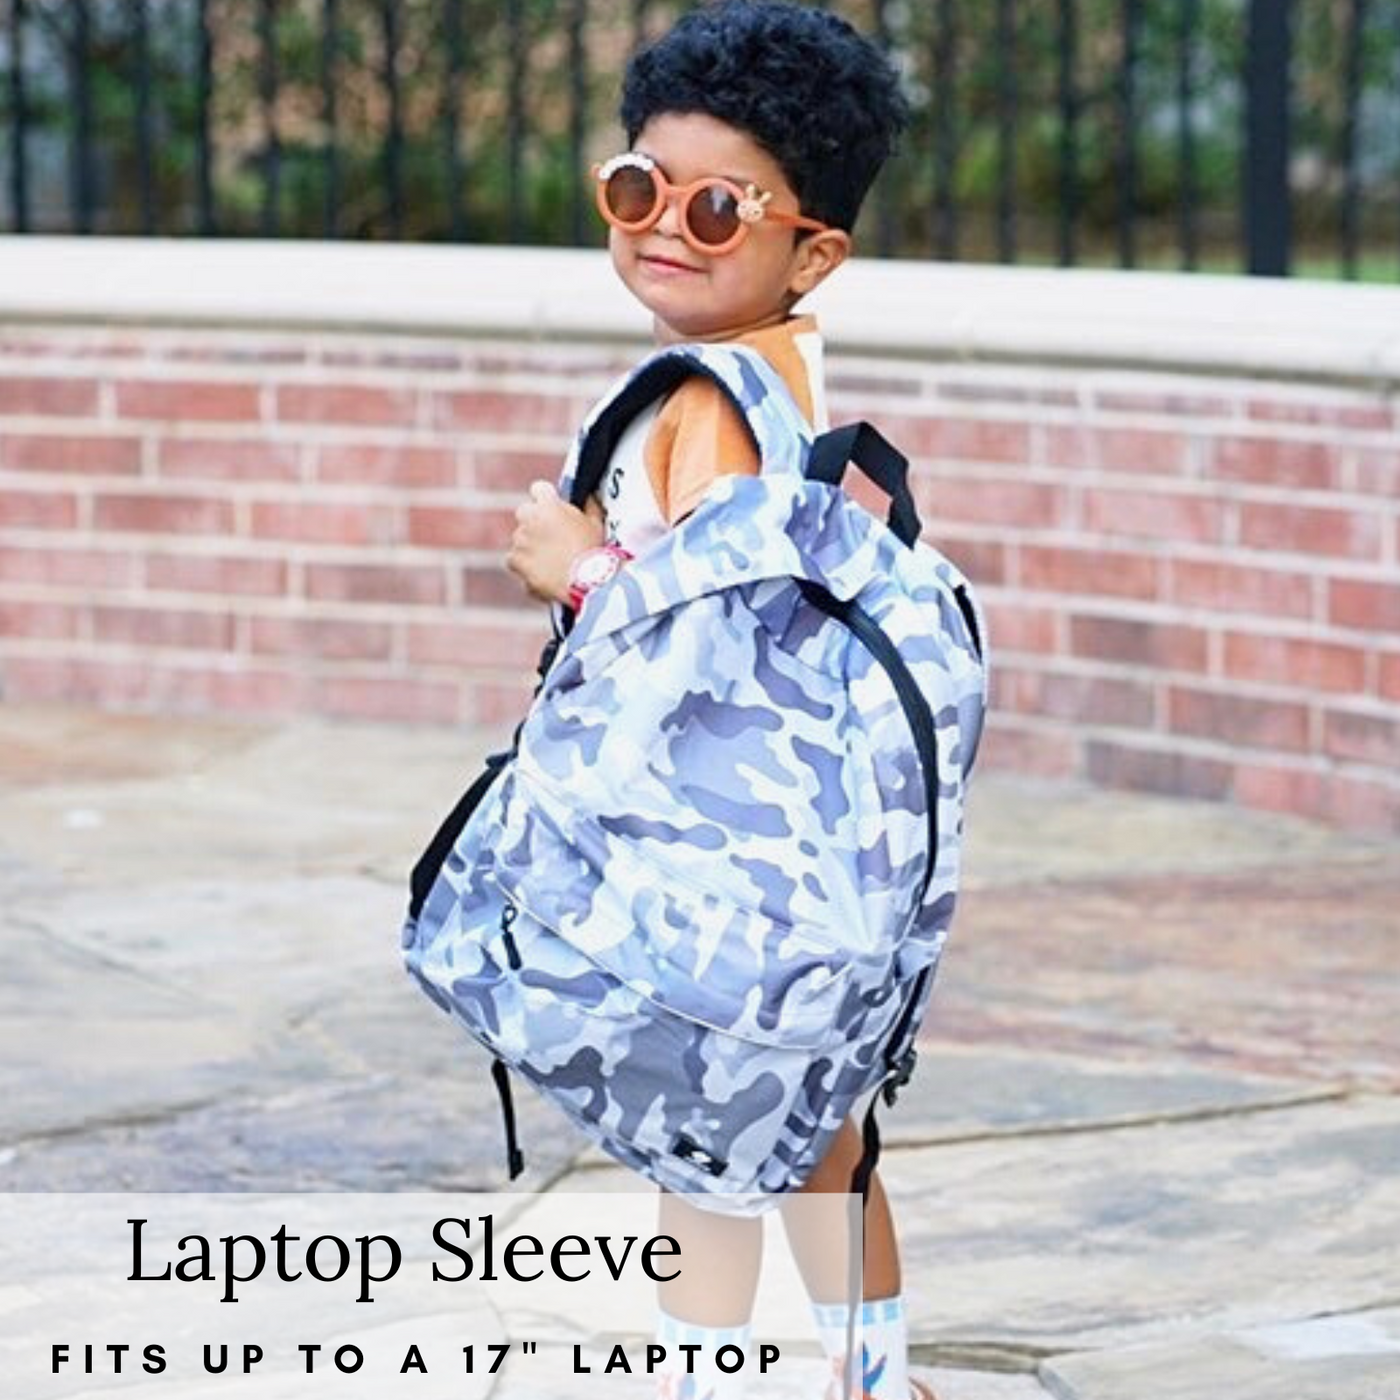 Kid's Quilted Camo Backpack & Lunch Box Set - Grey - Grey